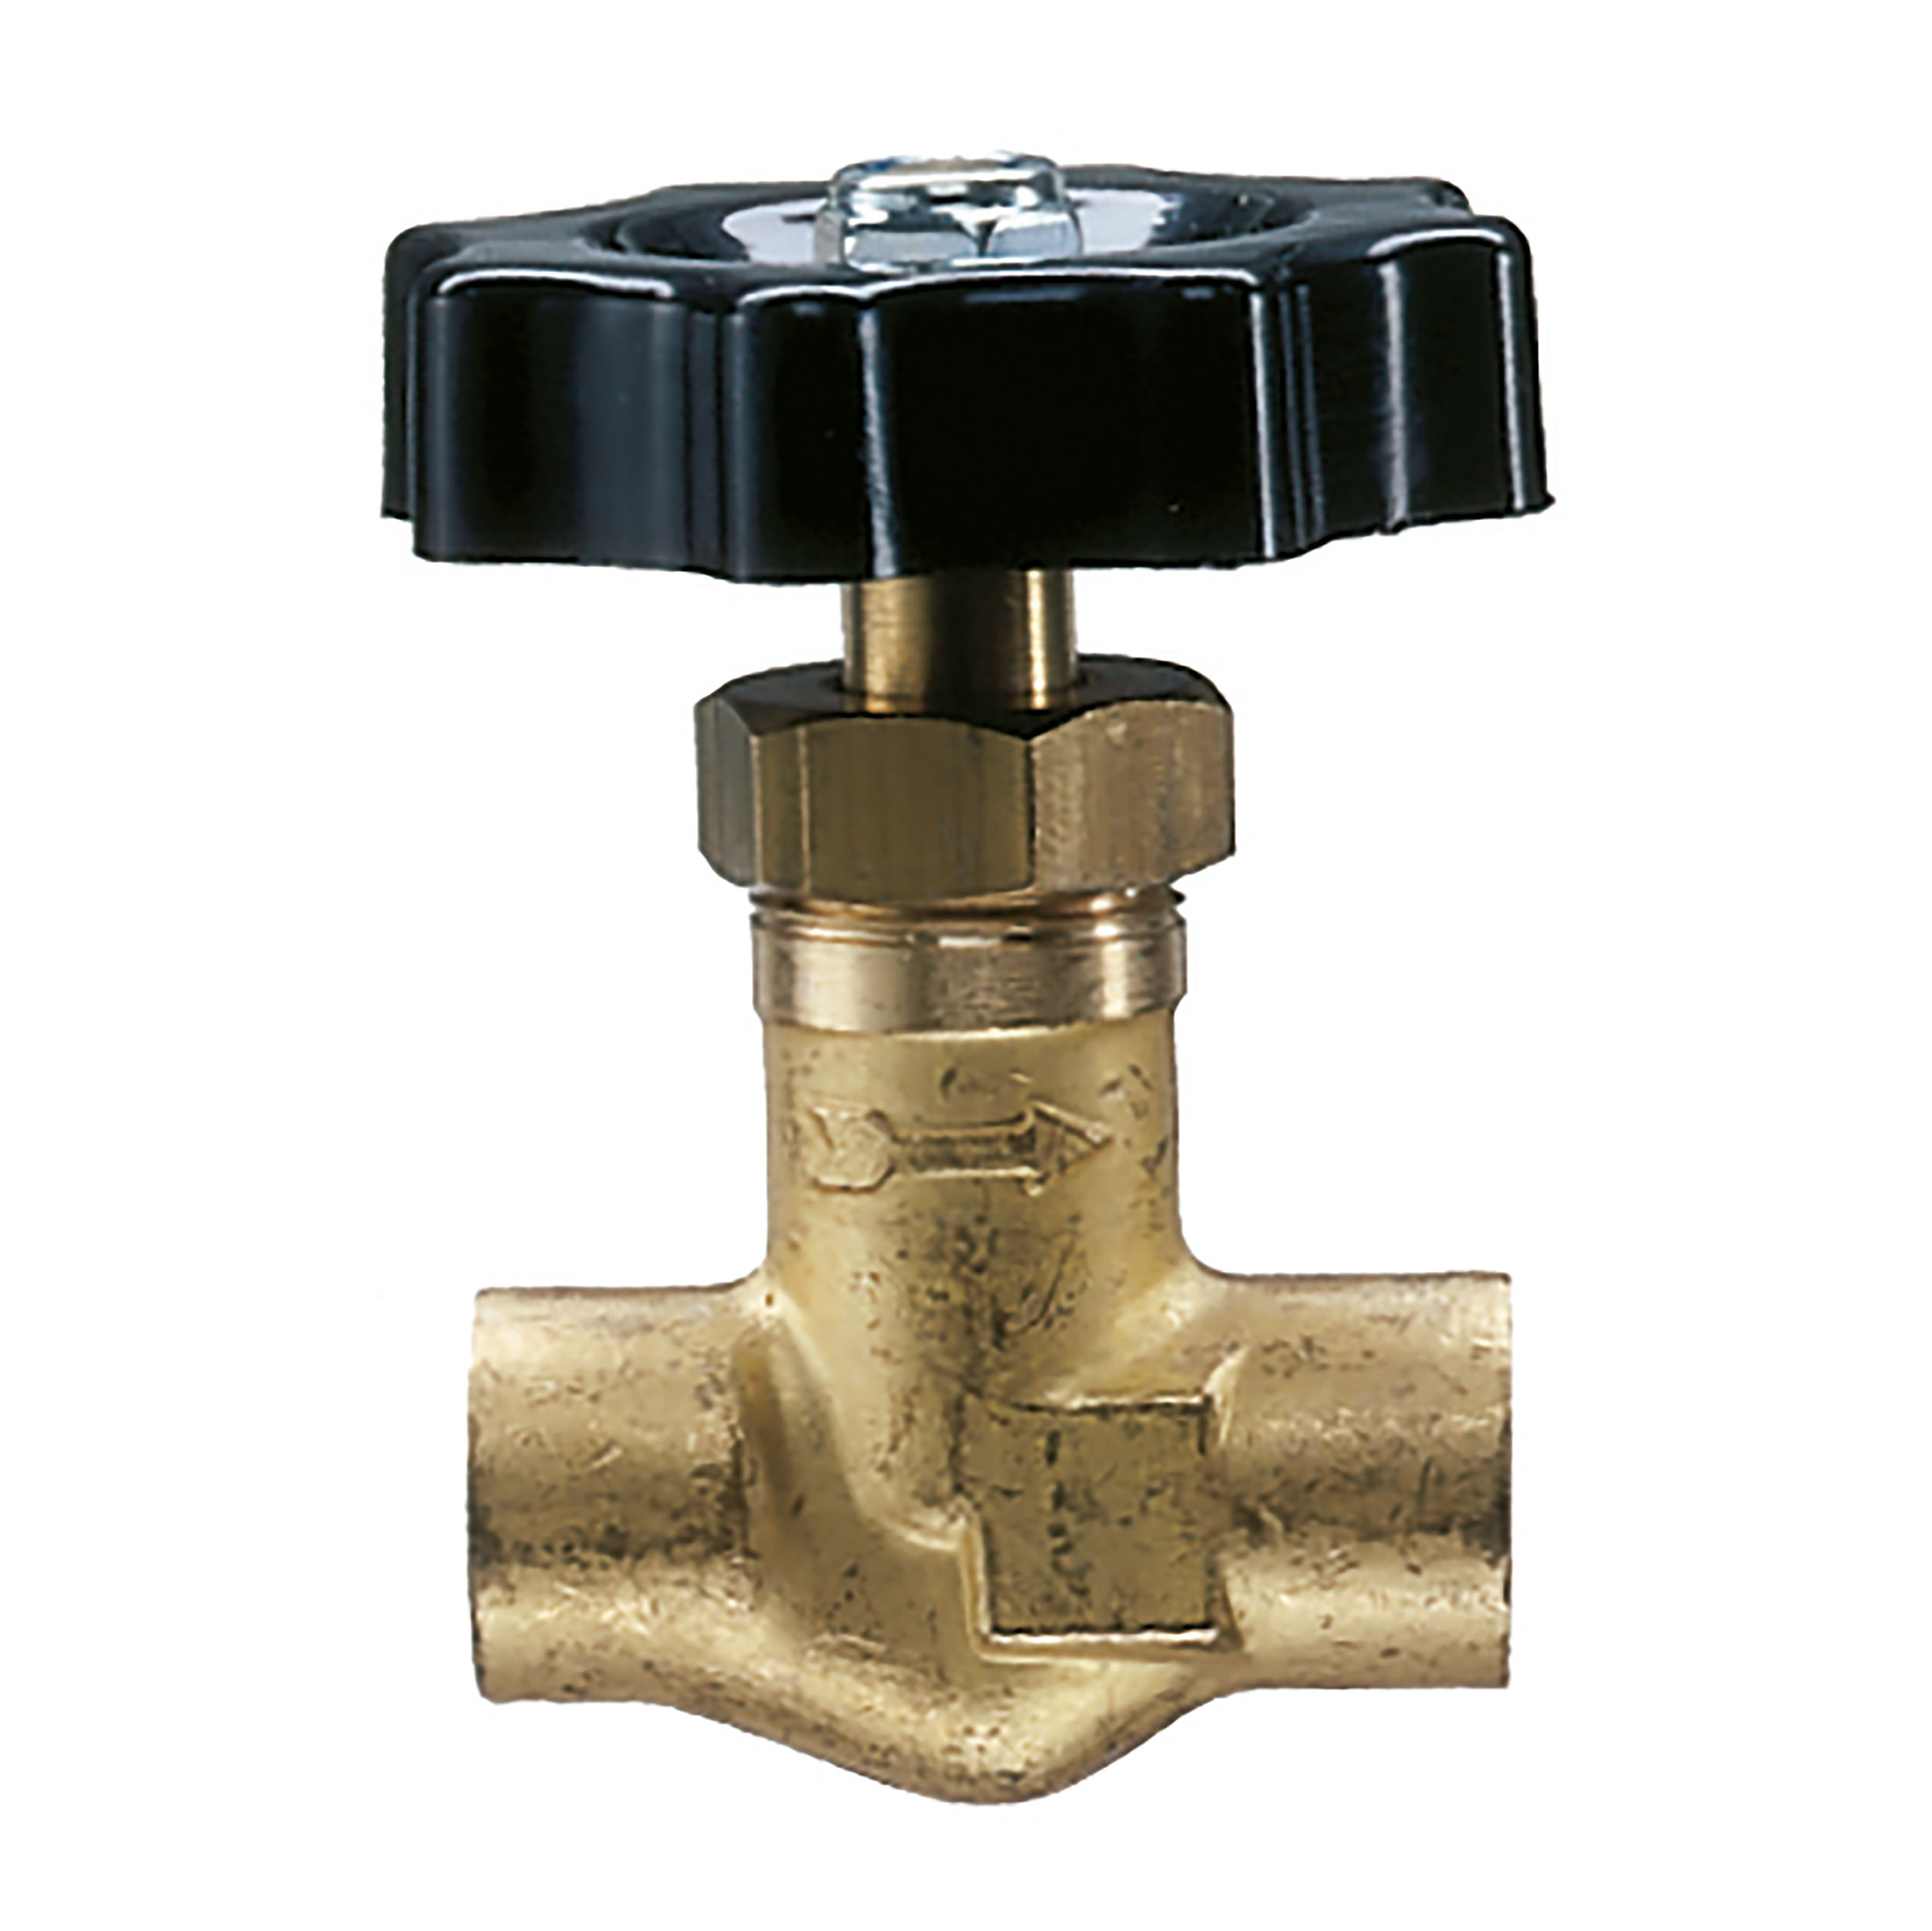 Pin control valve, straight way type, DN 4, max. operating pressure: 580 psi, i: 12 mm, connection thread: ¼ female, l: 42 mm